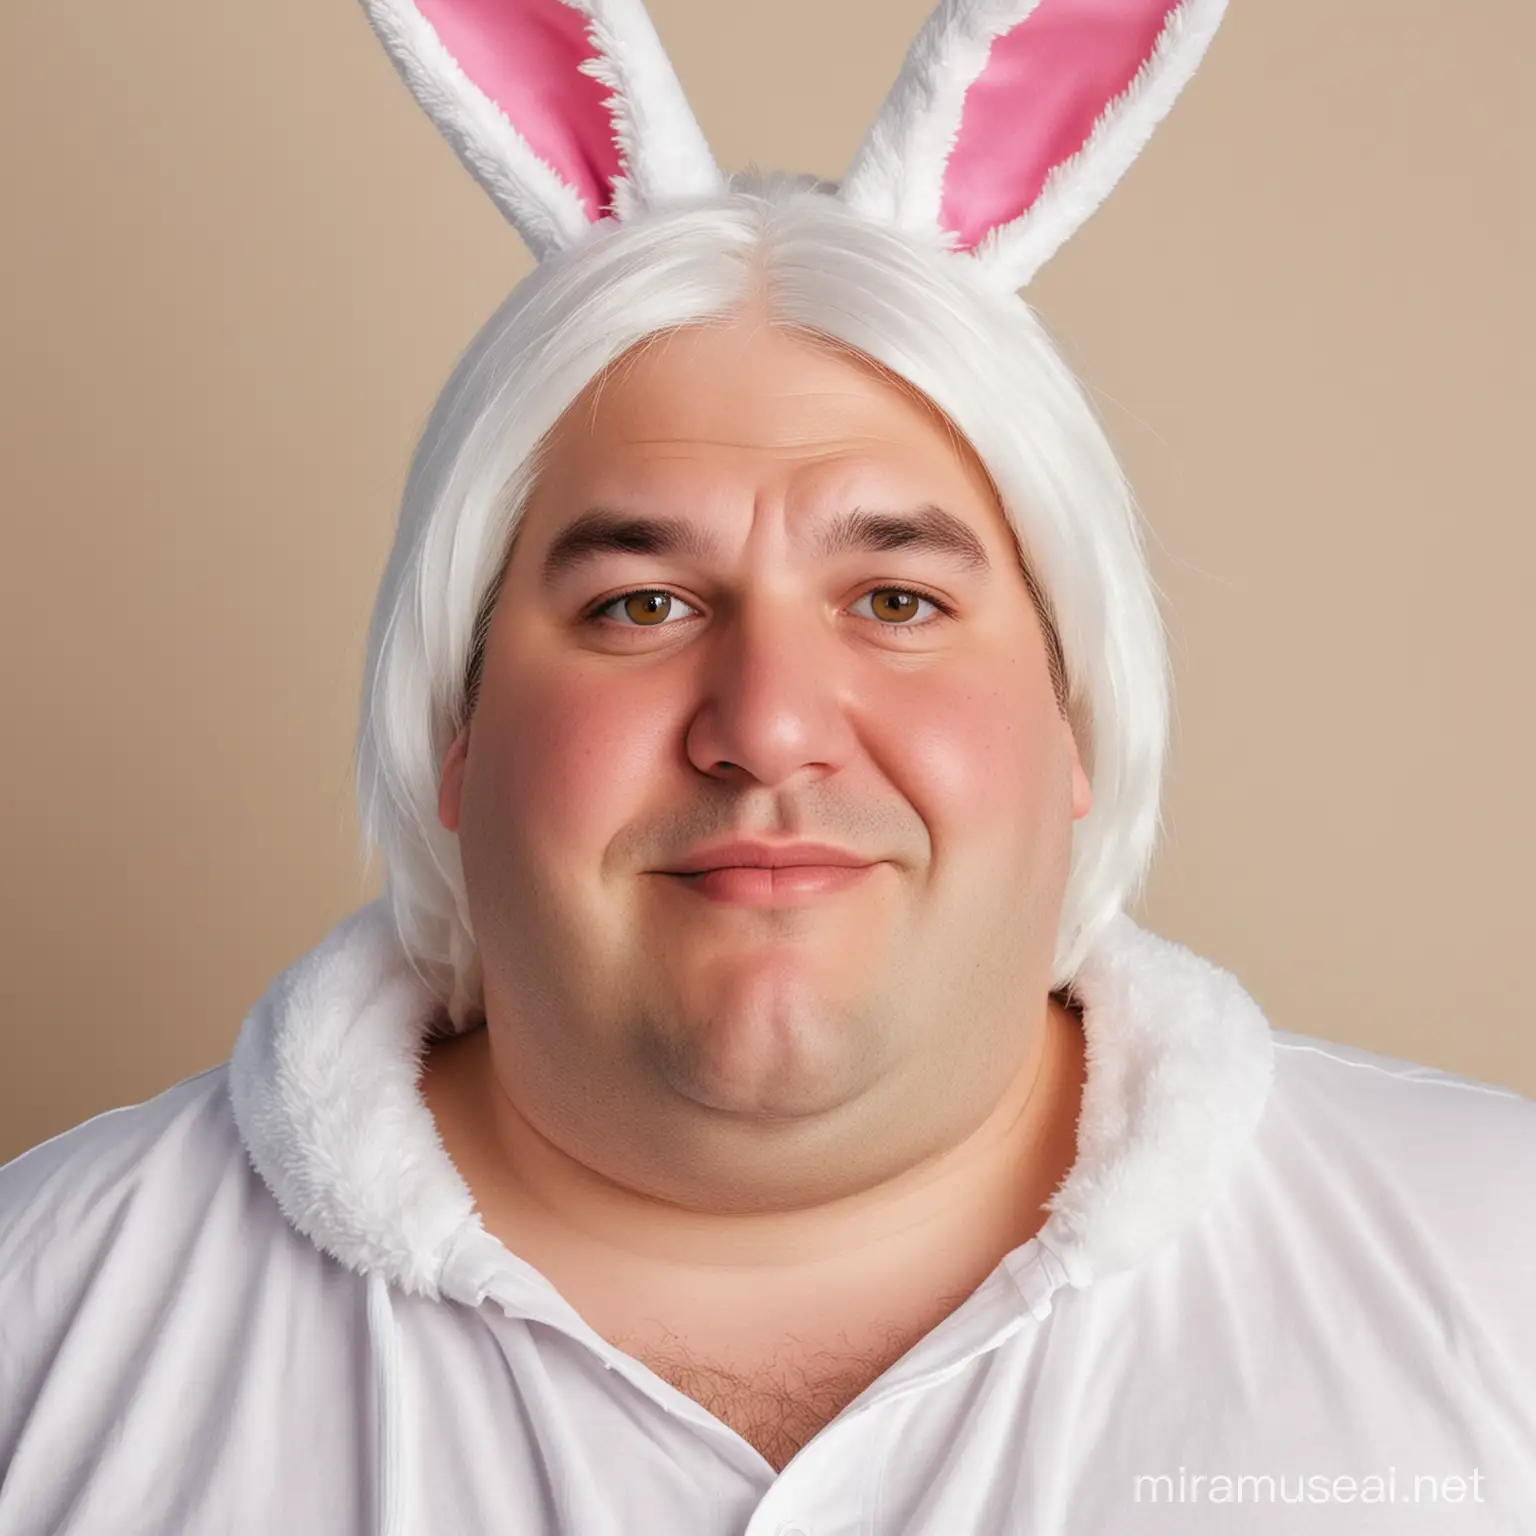 Chubby Elderly Man in Easter Bunny Costume with Squinted Eyes